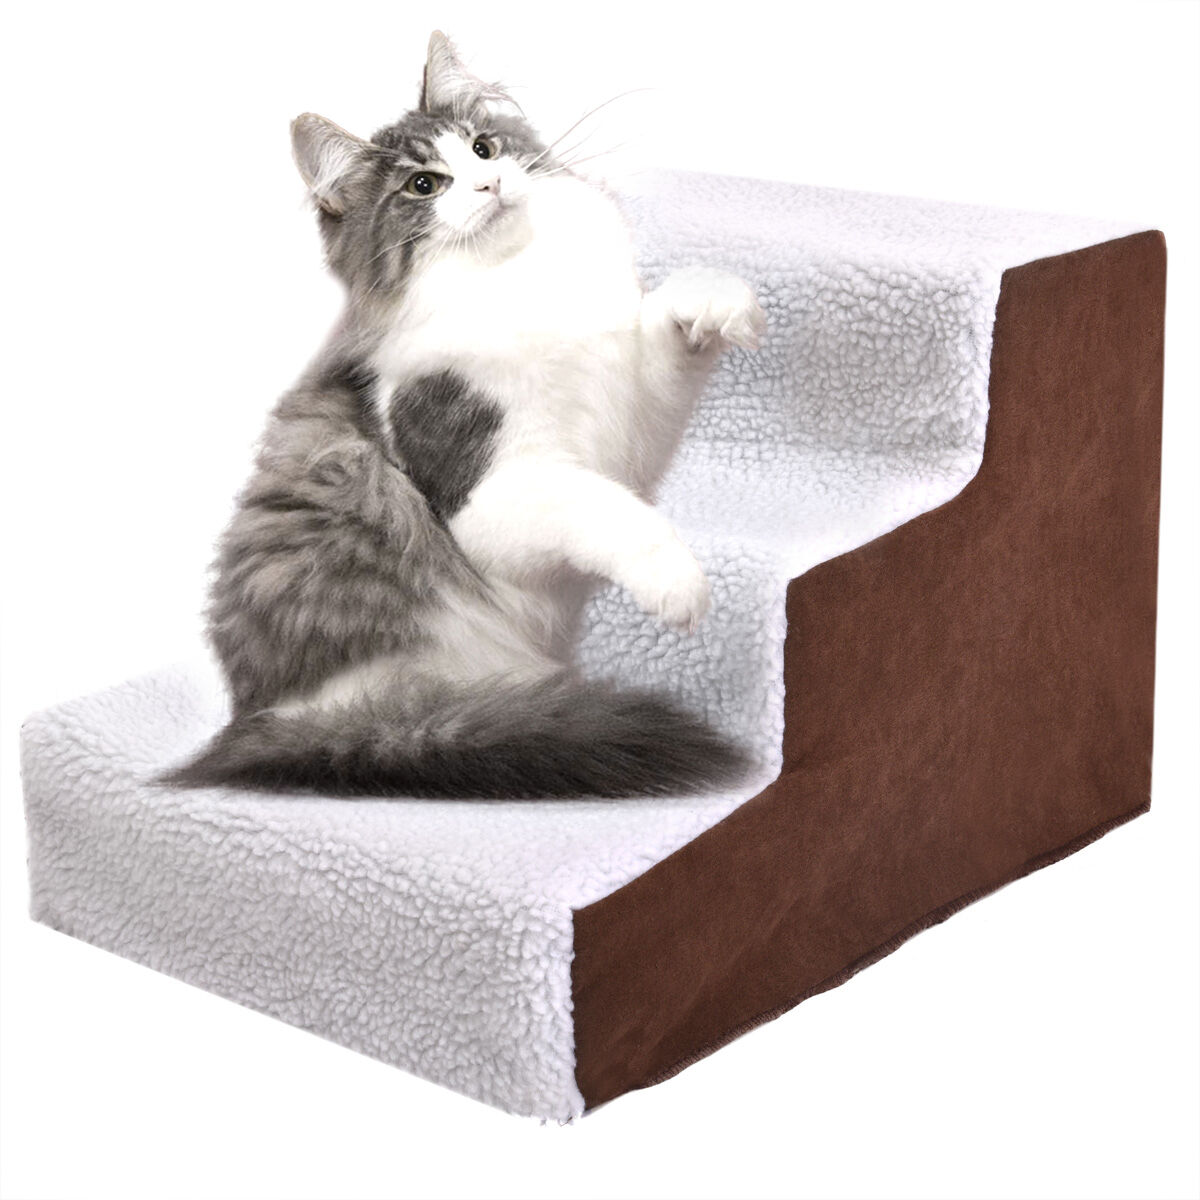 Pet Stairs 3 Steps Soft Portable Cat Dog Ladder w/ Cover Animal Ramp Small Climb